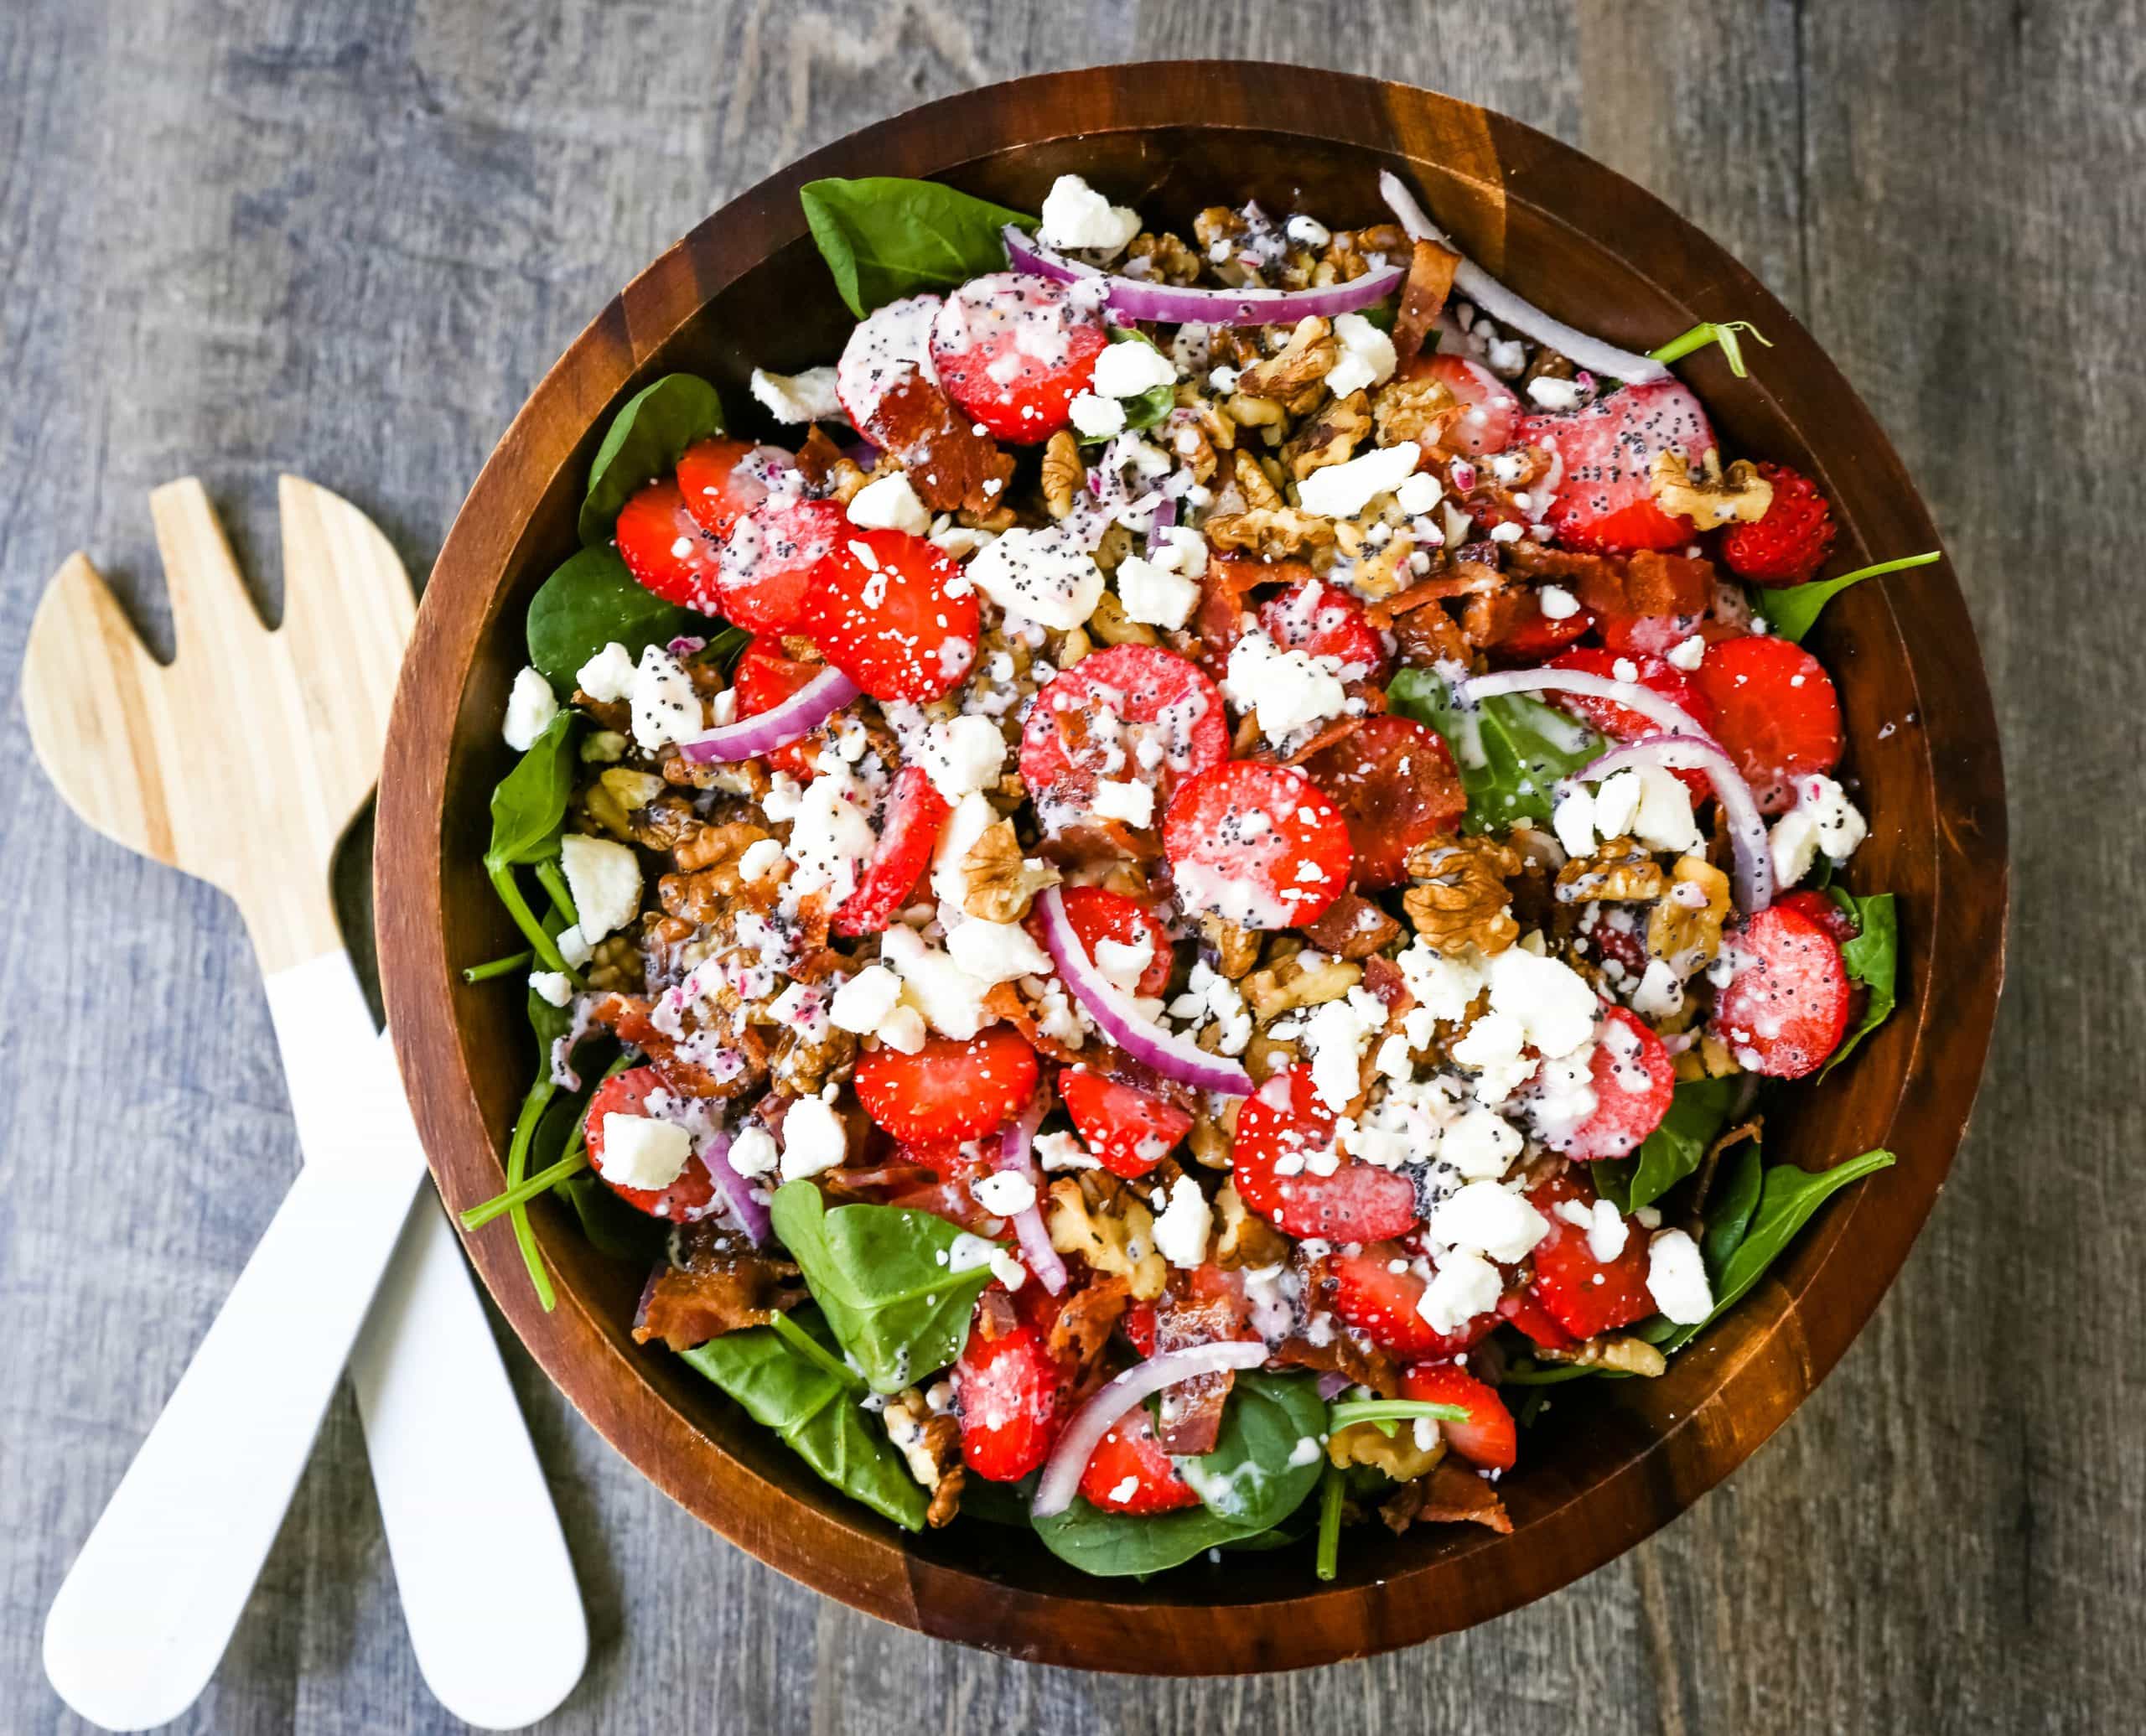 Strawberry Spinach Salad with Poppyseed Dressing Fresh spinach, sliced strawberries, feta cheese, crispy bacon, walnuts, and red onion in a sweet homemade poppyseed dressing. www.modernhoney.com #salad #salads #spinachsalad 